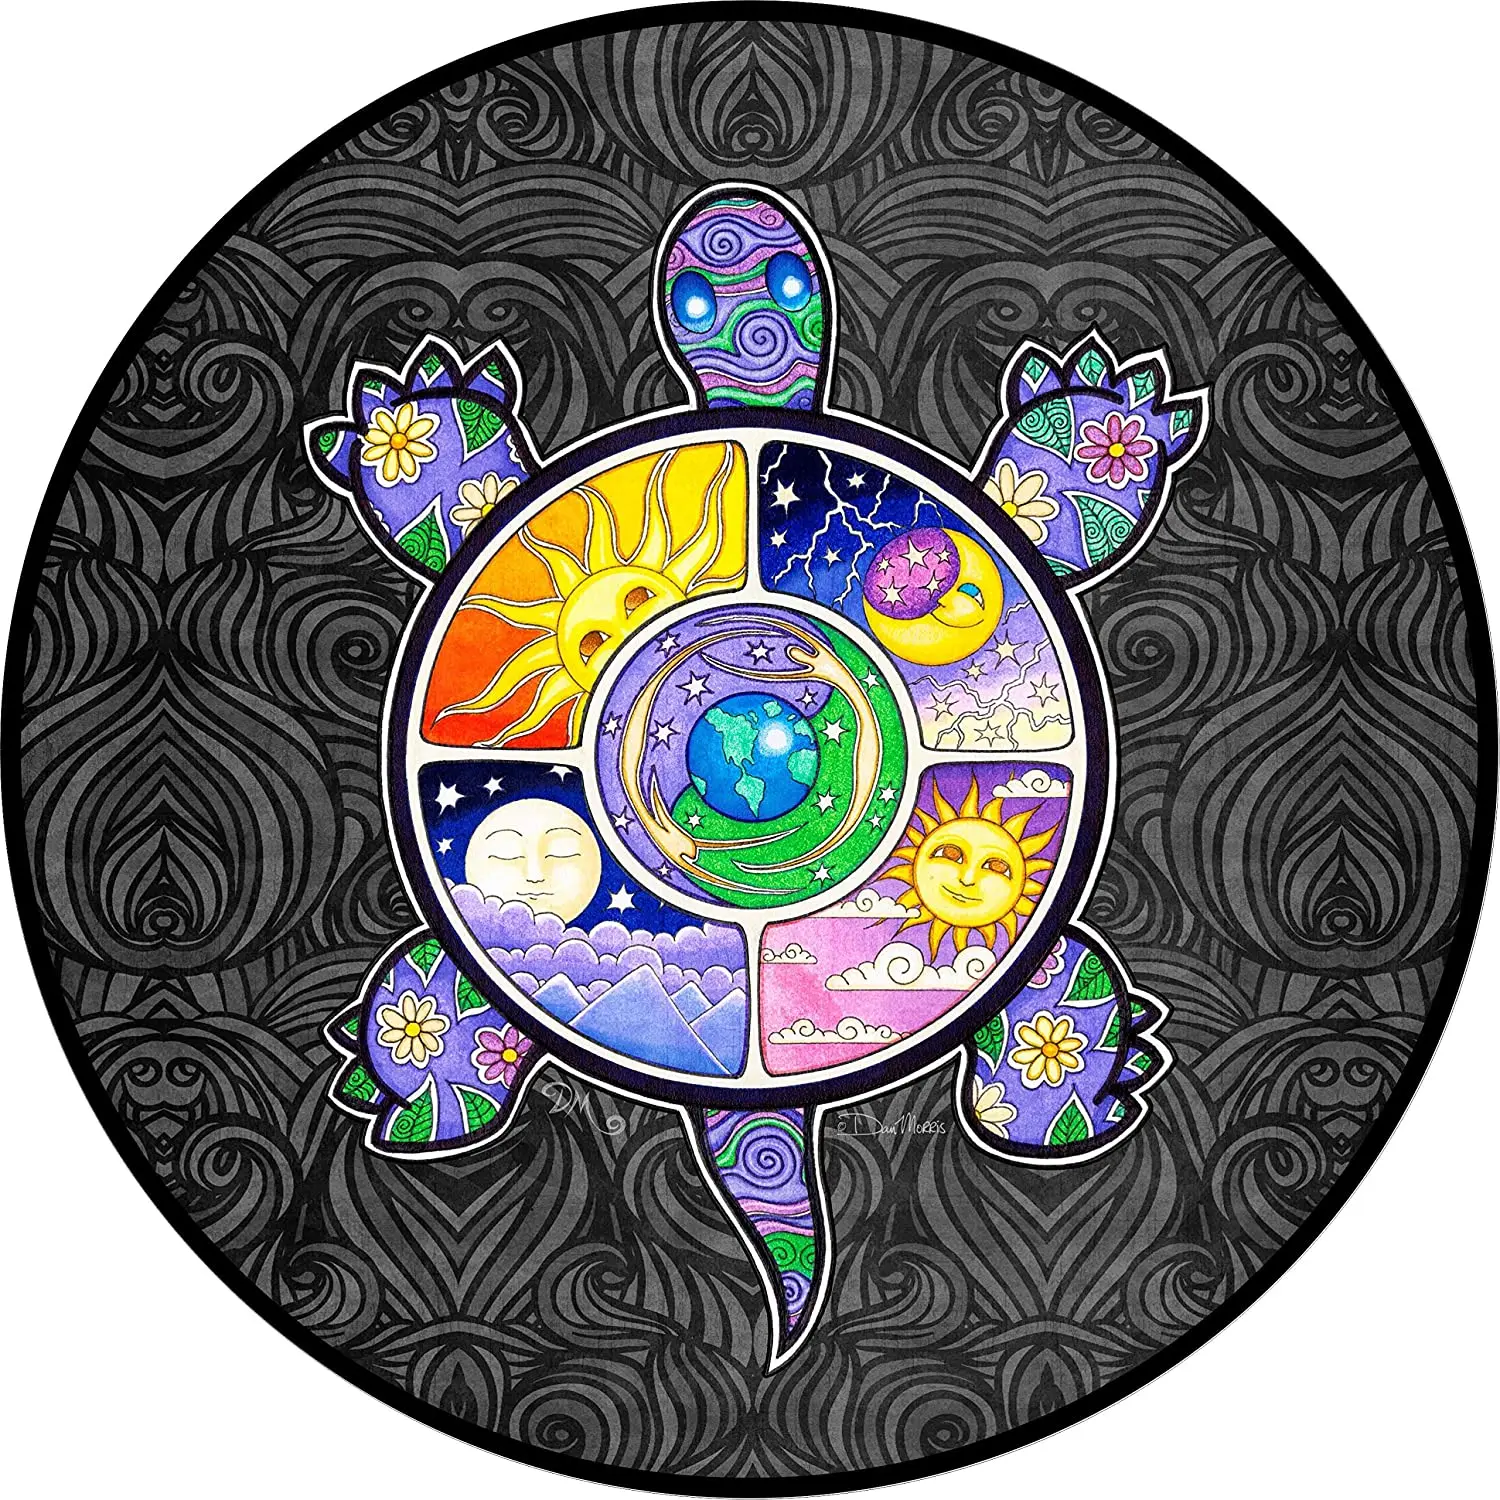 

TIRE COVER CENTRAL Earth Turtle Day Spare Tire Cover ( Custom Sizes for Any Make